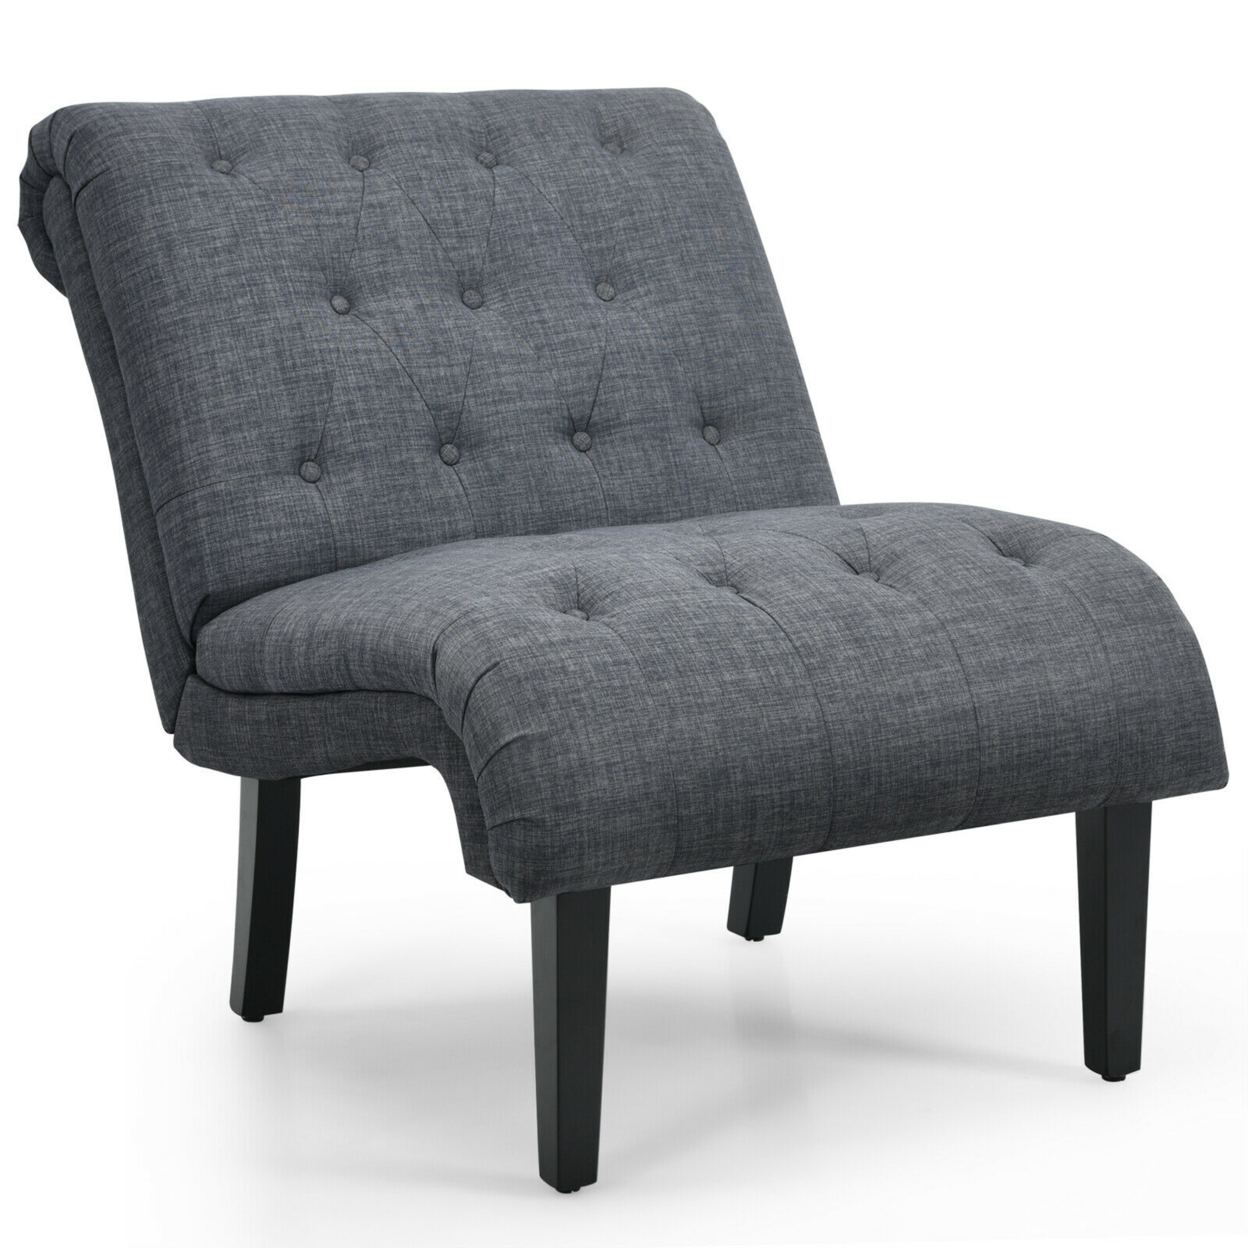 Armless Accent Chair Upholstered Tufted Lounge Chair Wood Leg - Dark Grey